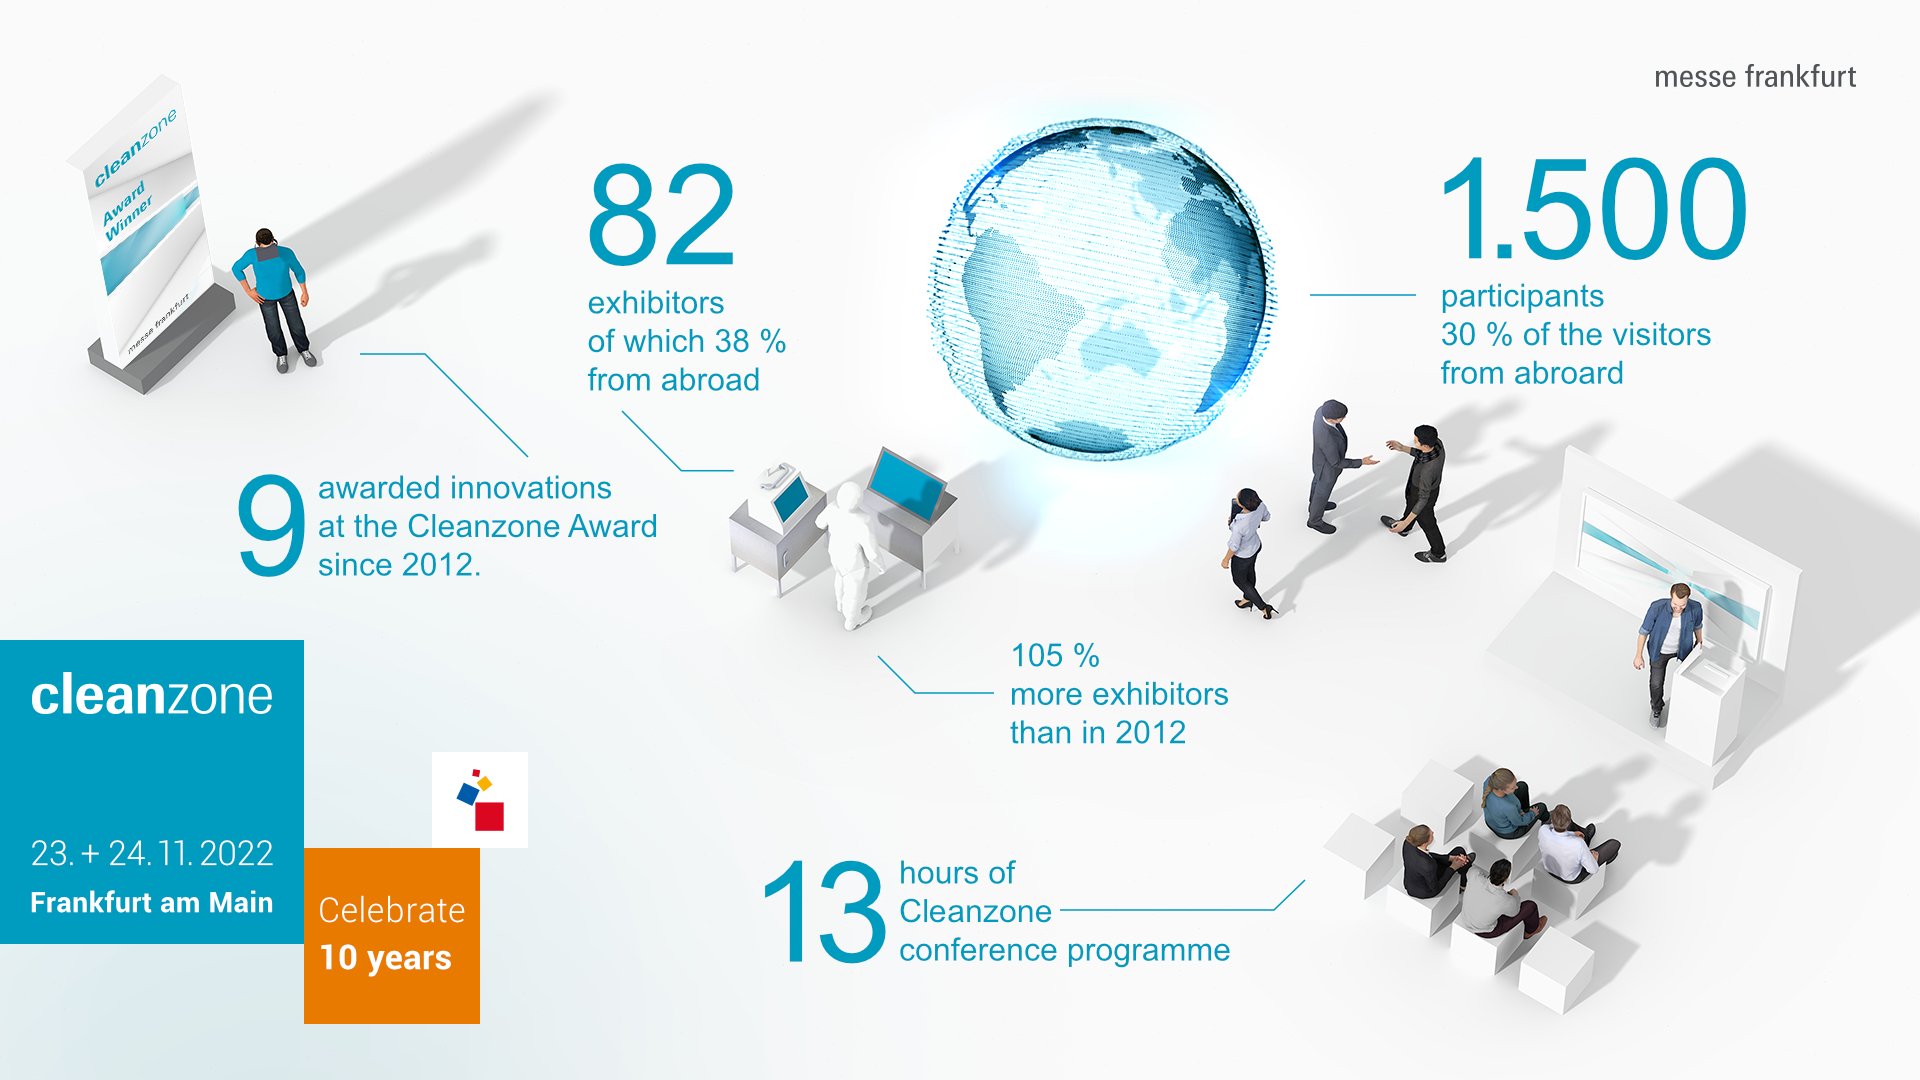 Facts and figures on Cleanzone 2022. Source: Messe Frankfurt Exhibition GmbH